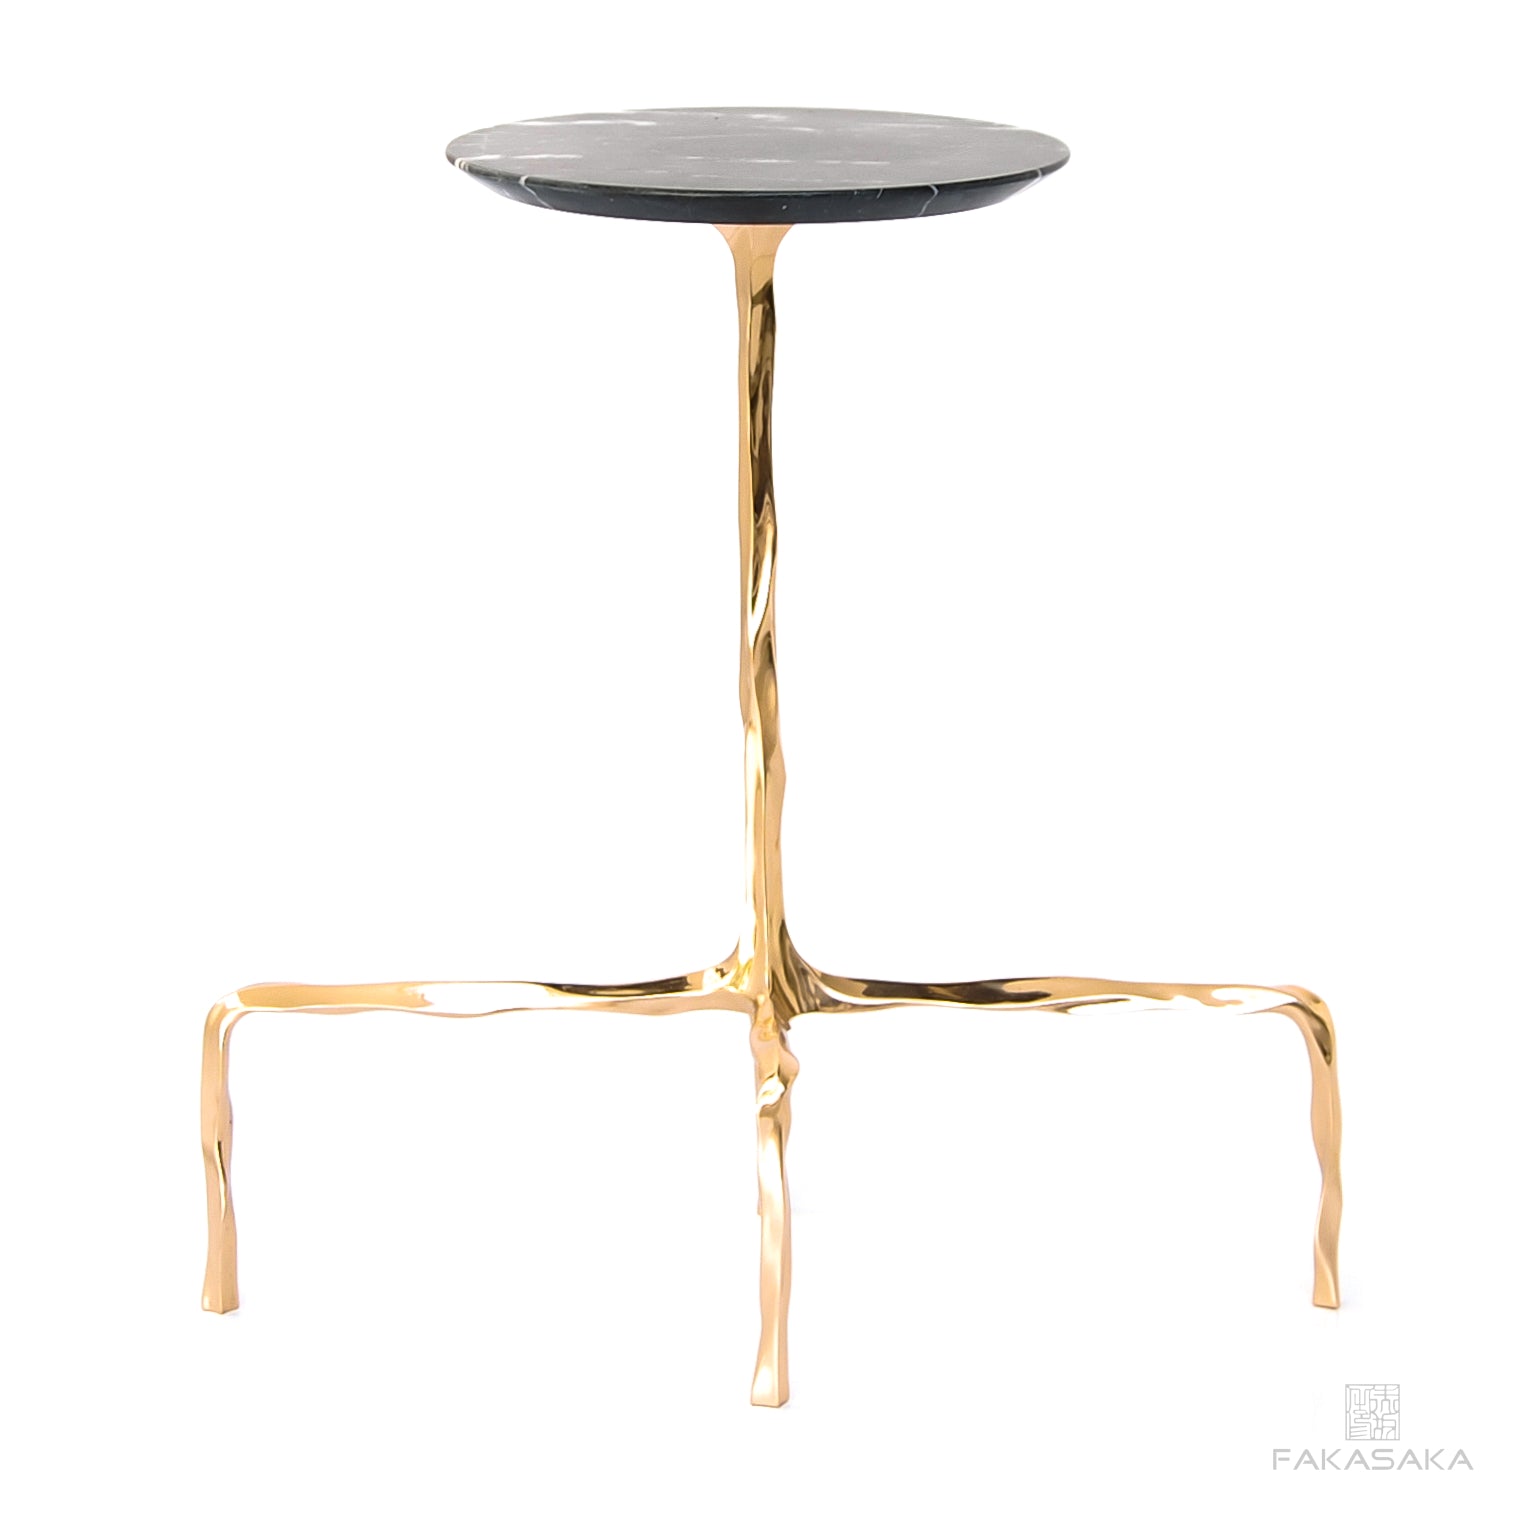 PRESLEY DRINK TABLE<br><br>NERO MARQUINA MARBLE<br>POLISHED BRONZE